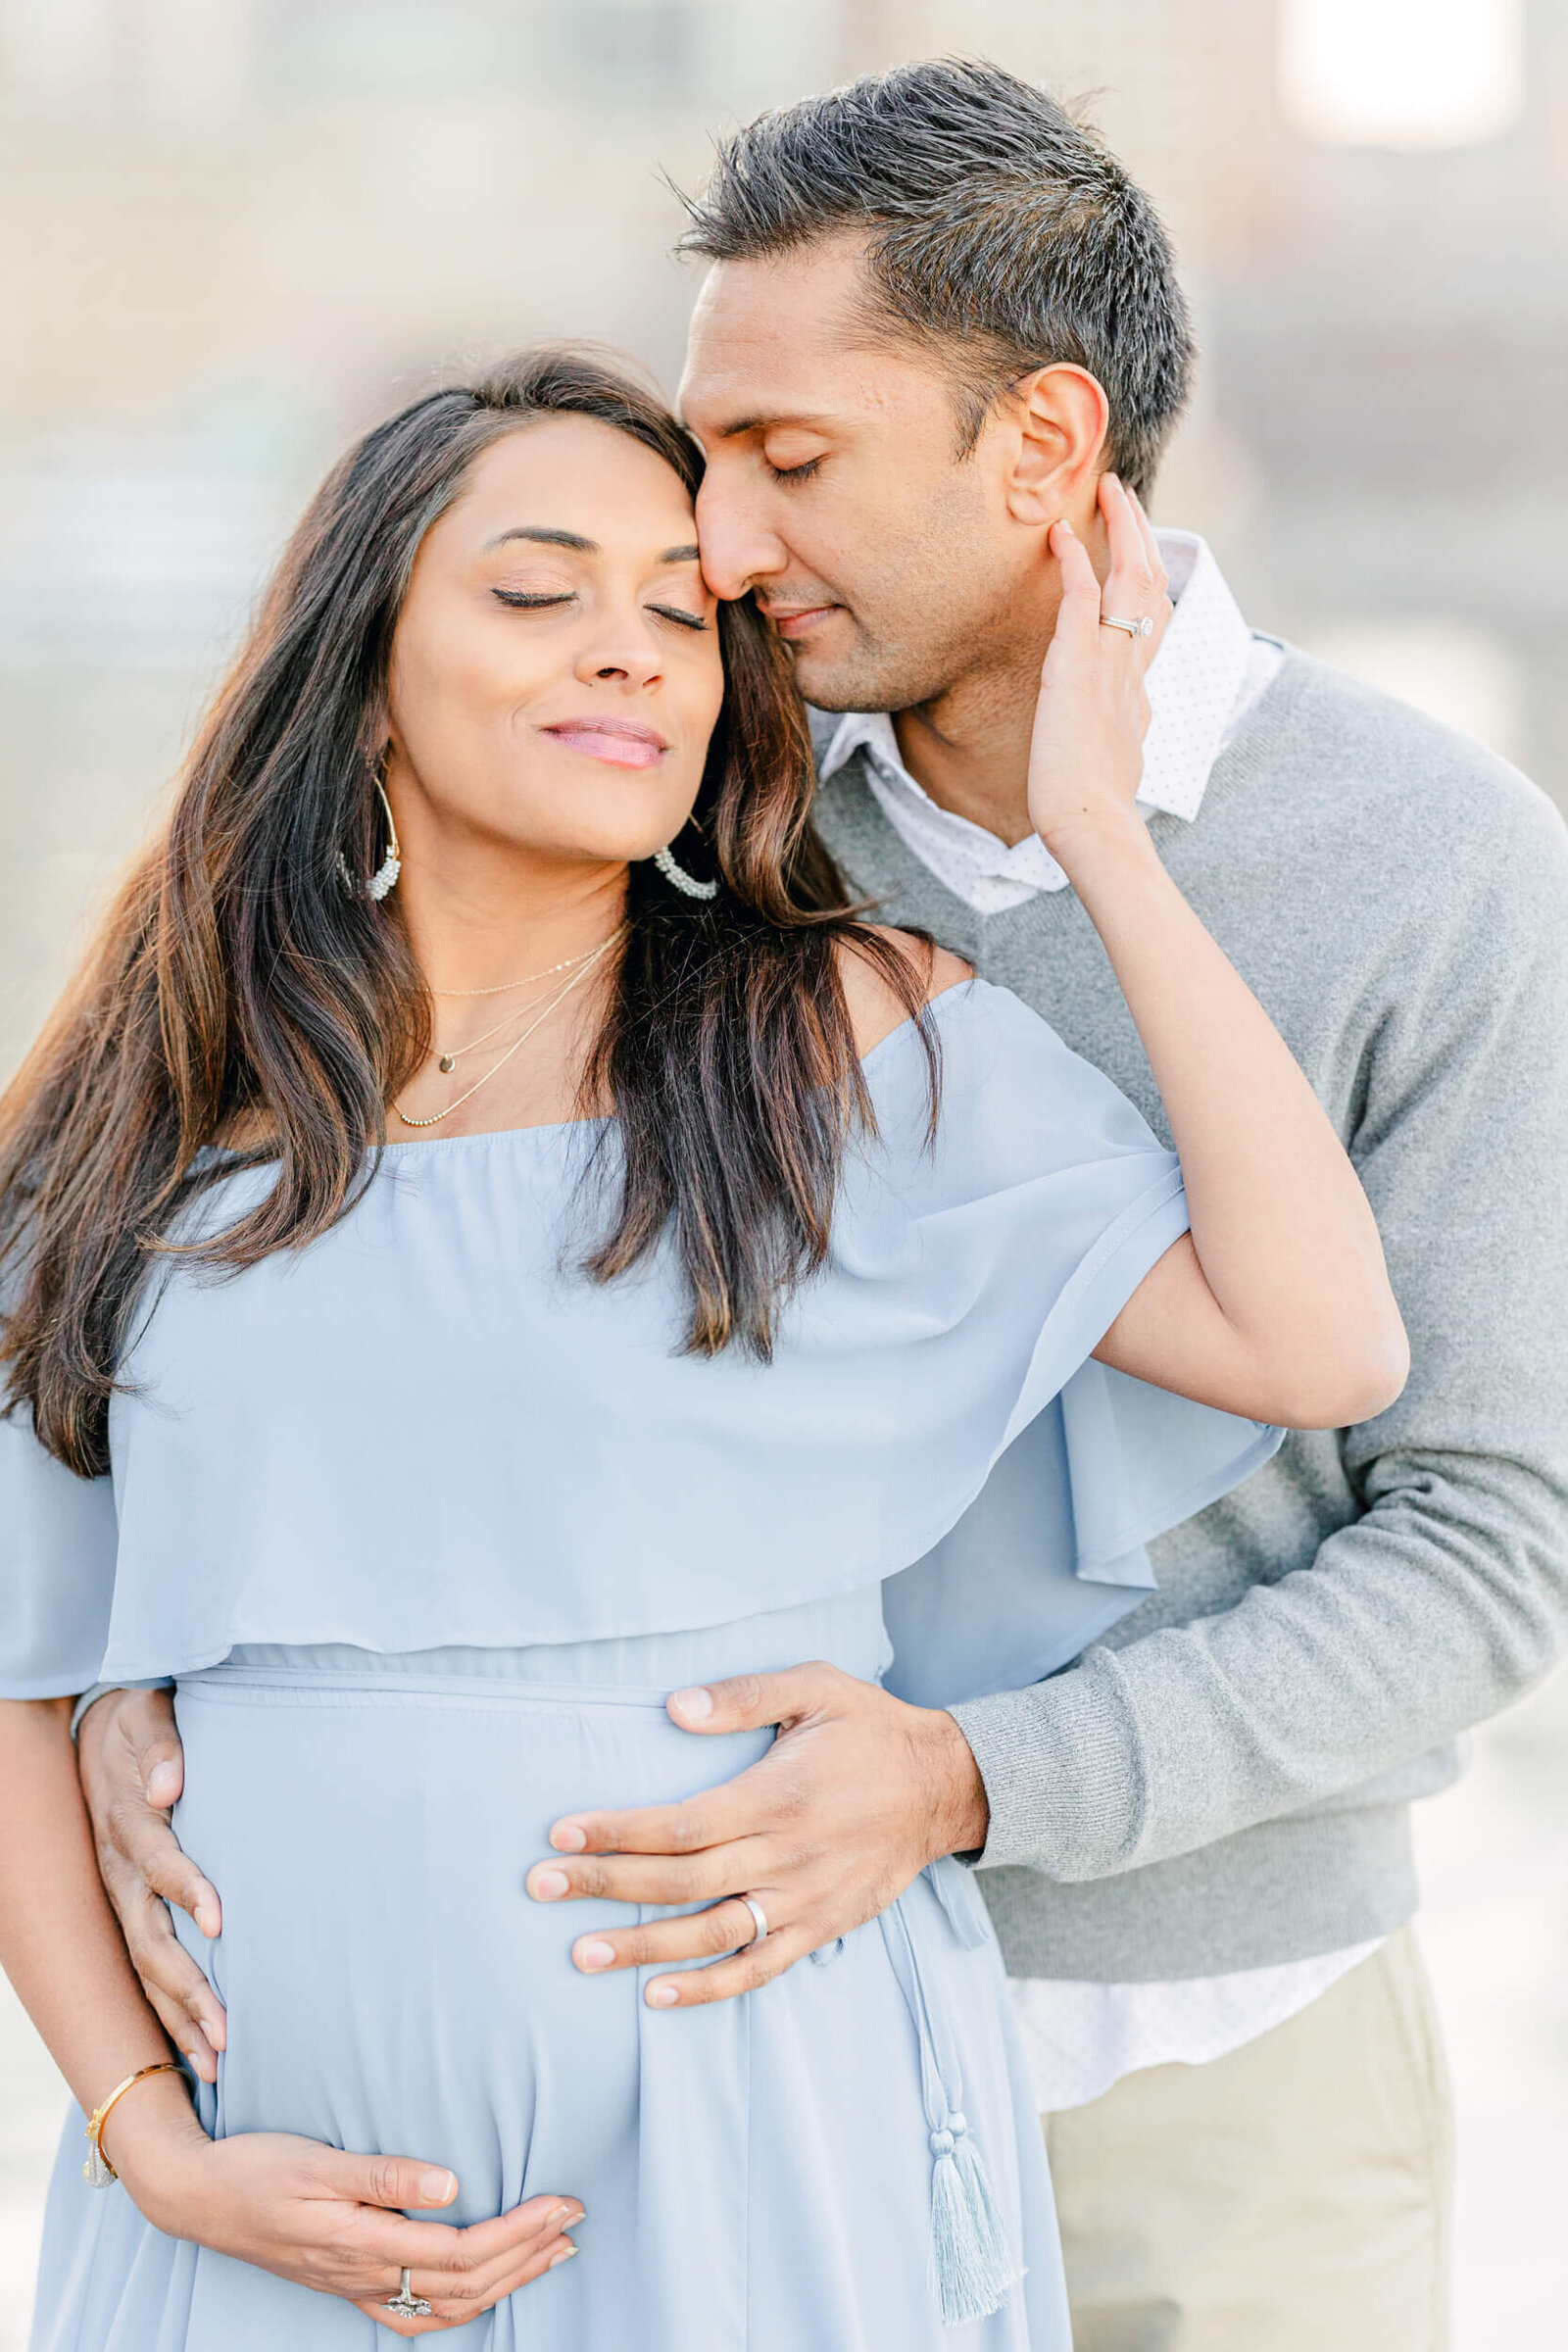 Pregnant woman and her husband stand together with their eyes closed and their hands on her baby bump